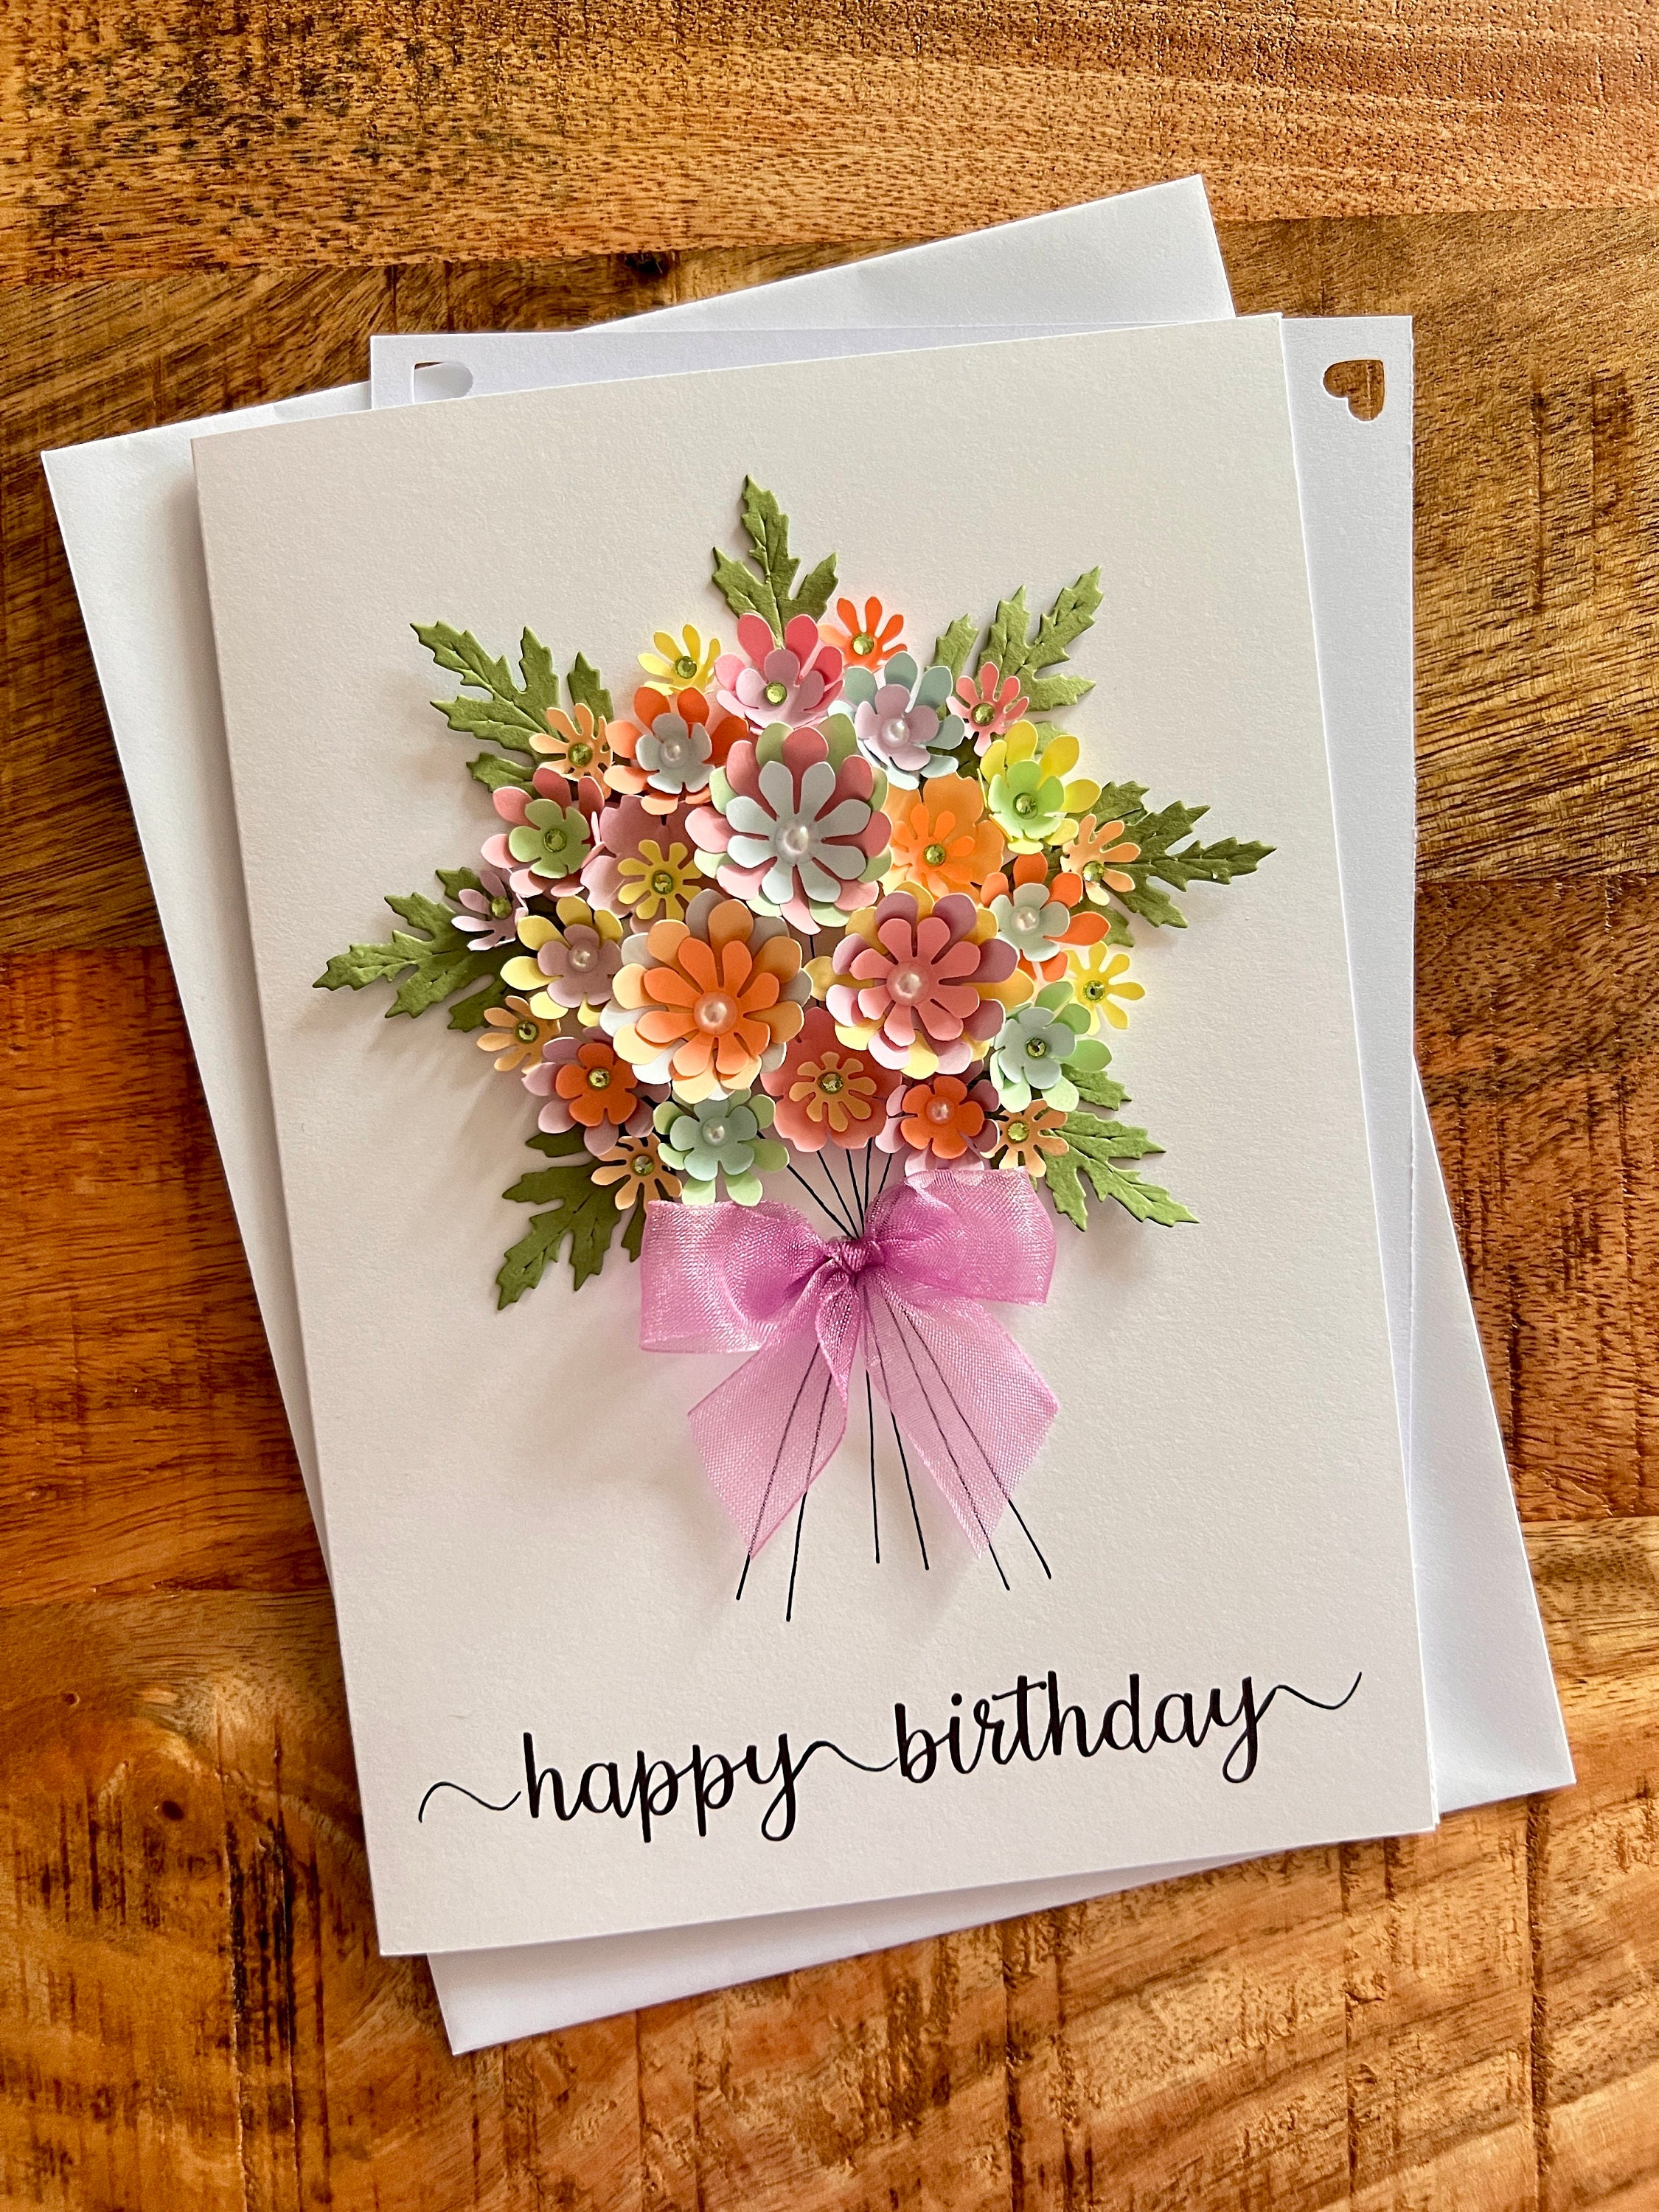 A6 Size Birthday Cards, Happy Birthday Cards, Gift Cards, Graduation Cards,  Floral Cards, Thank You Cards, Congratulations Cards 